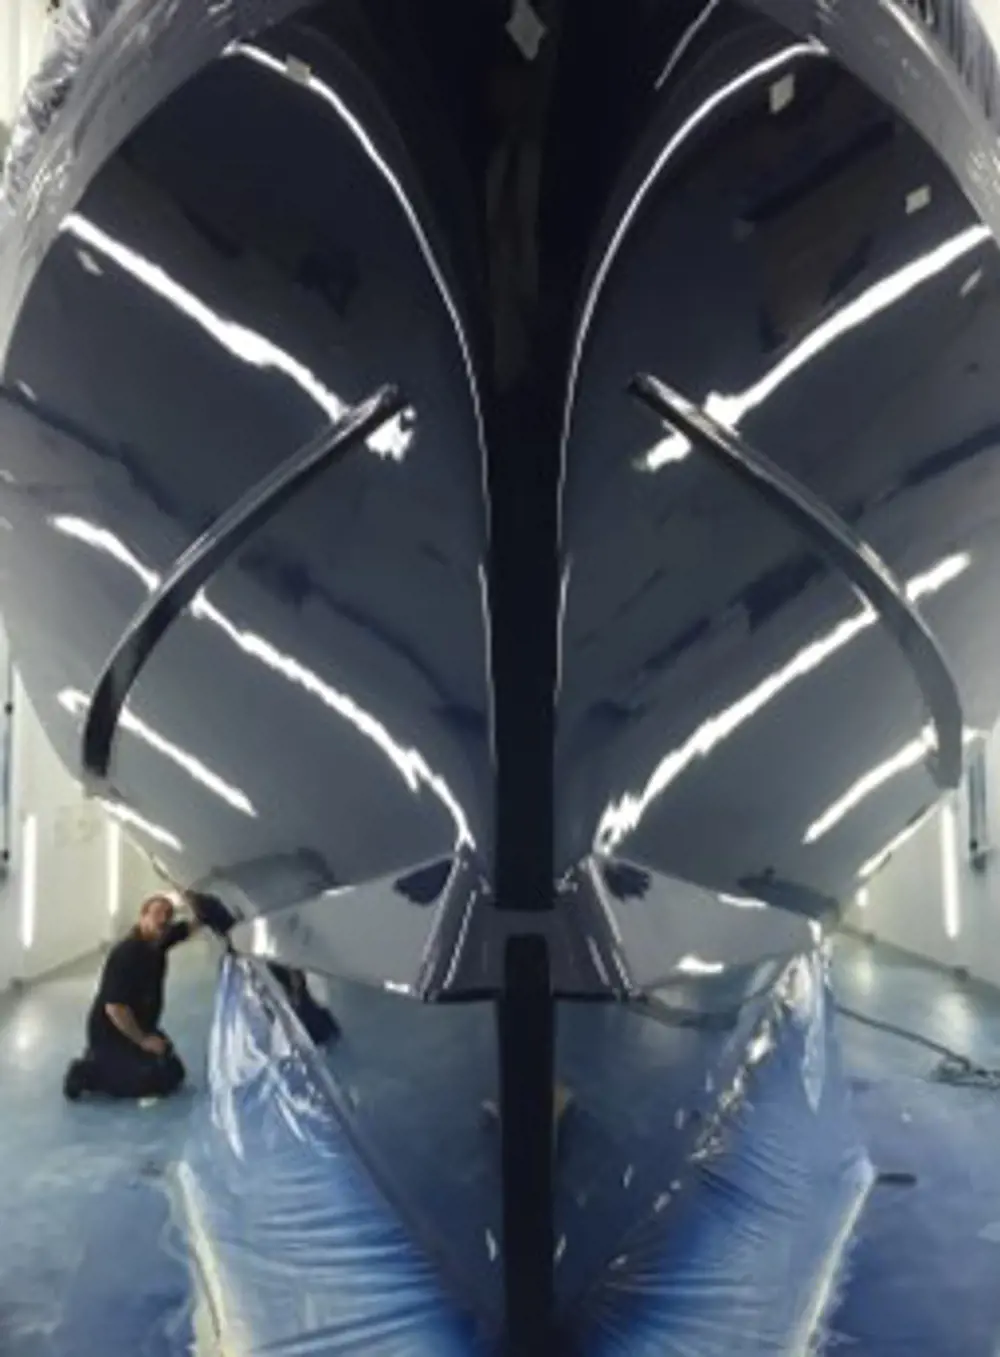 A person kneeling next to the hull of the Shannon boat inside a brightly lit room.